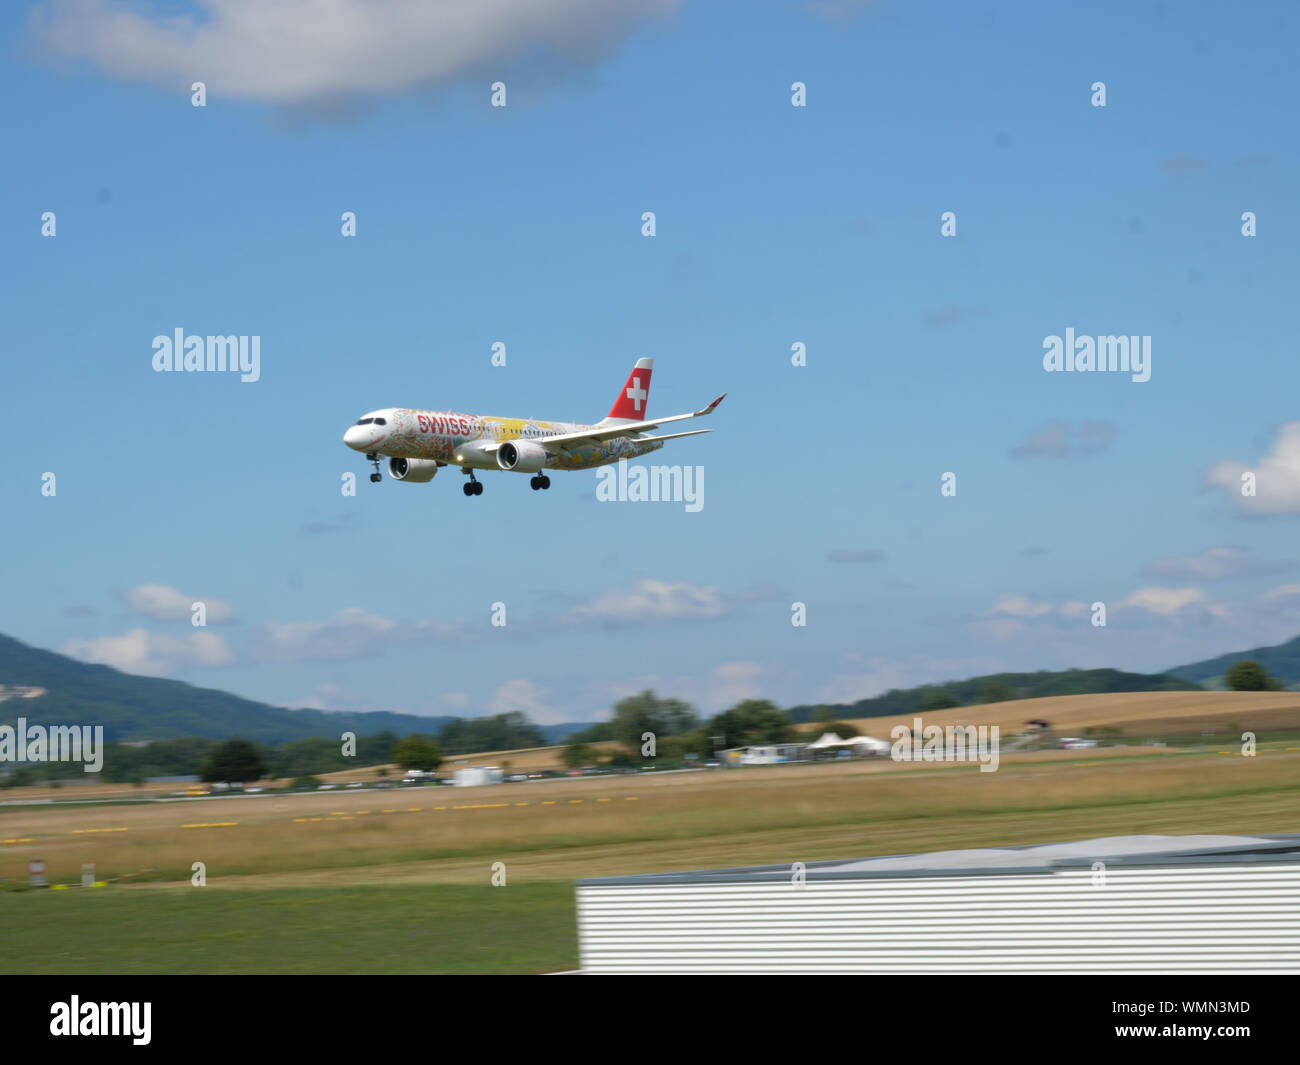 Fête des Vignerons livery of Swiss international airlines C-Series Stock Photo